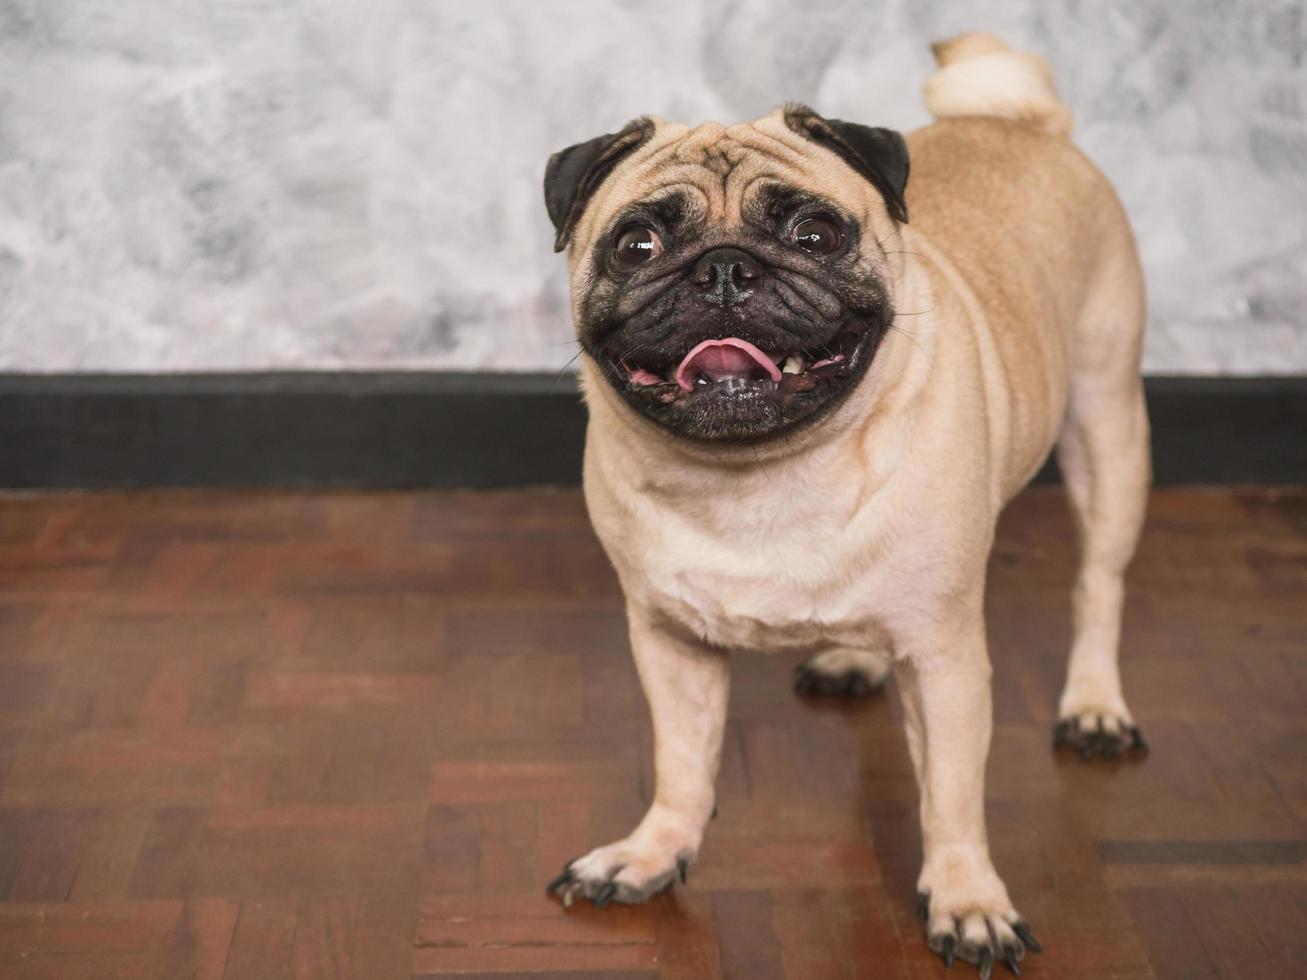 Adorable pug dog standing on floor at home, 3 year old ,looking at the camera photo